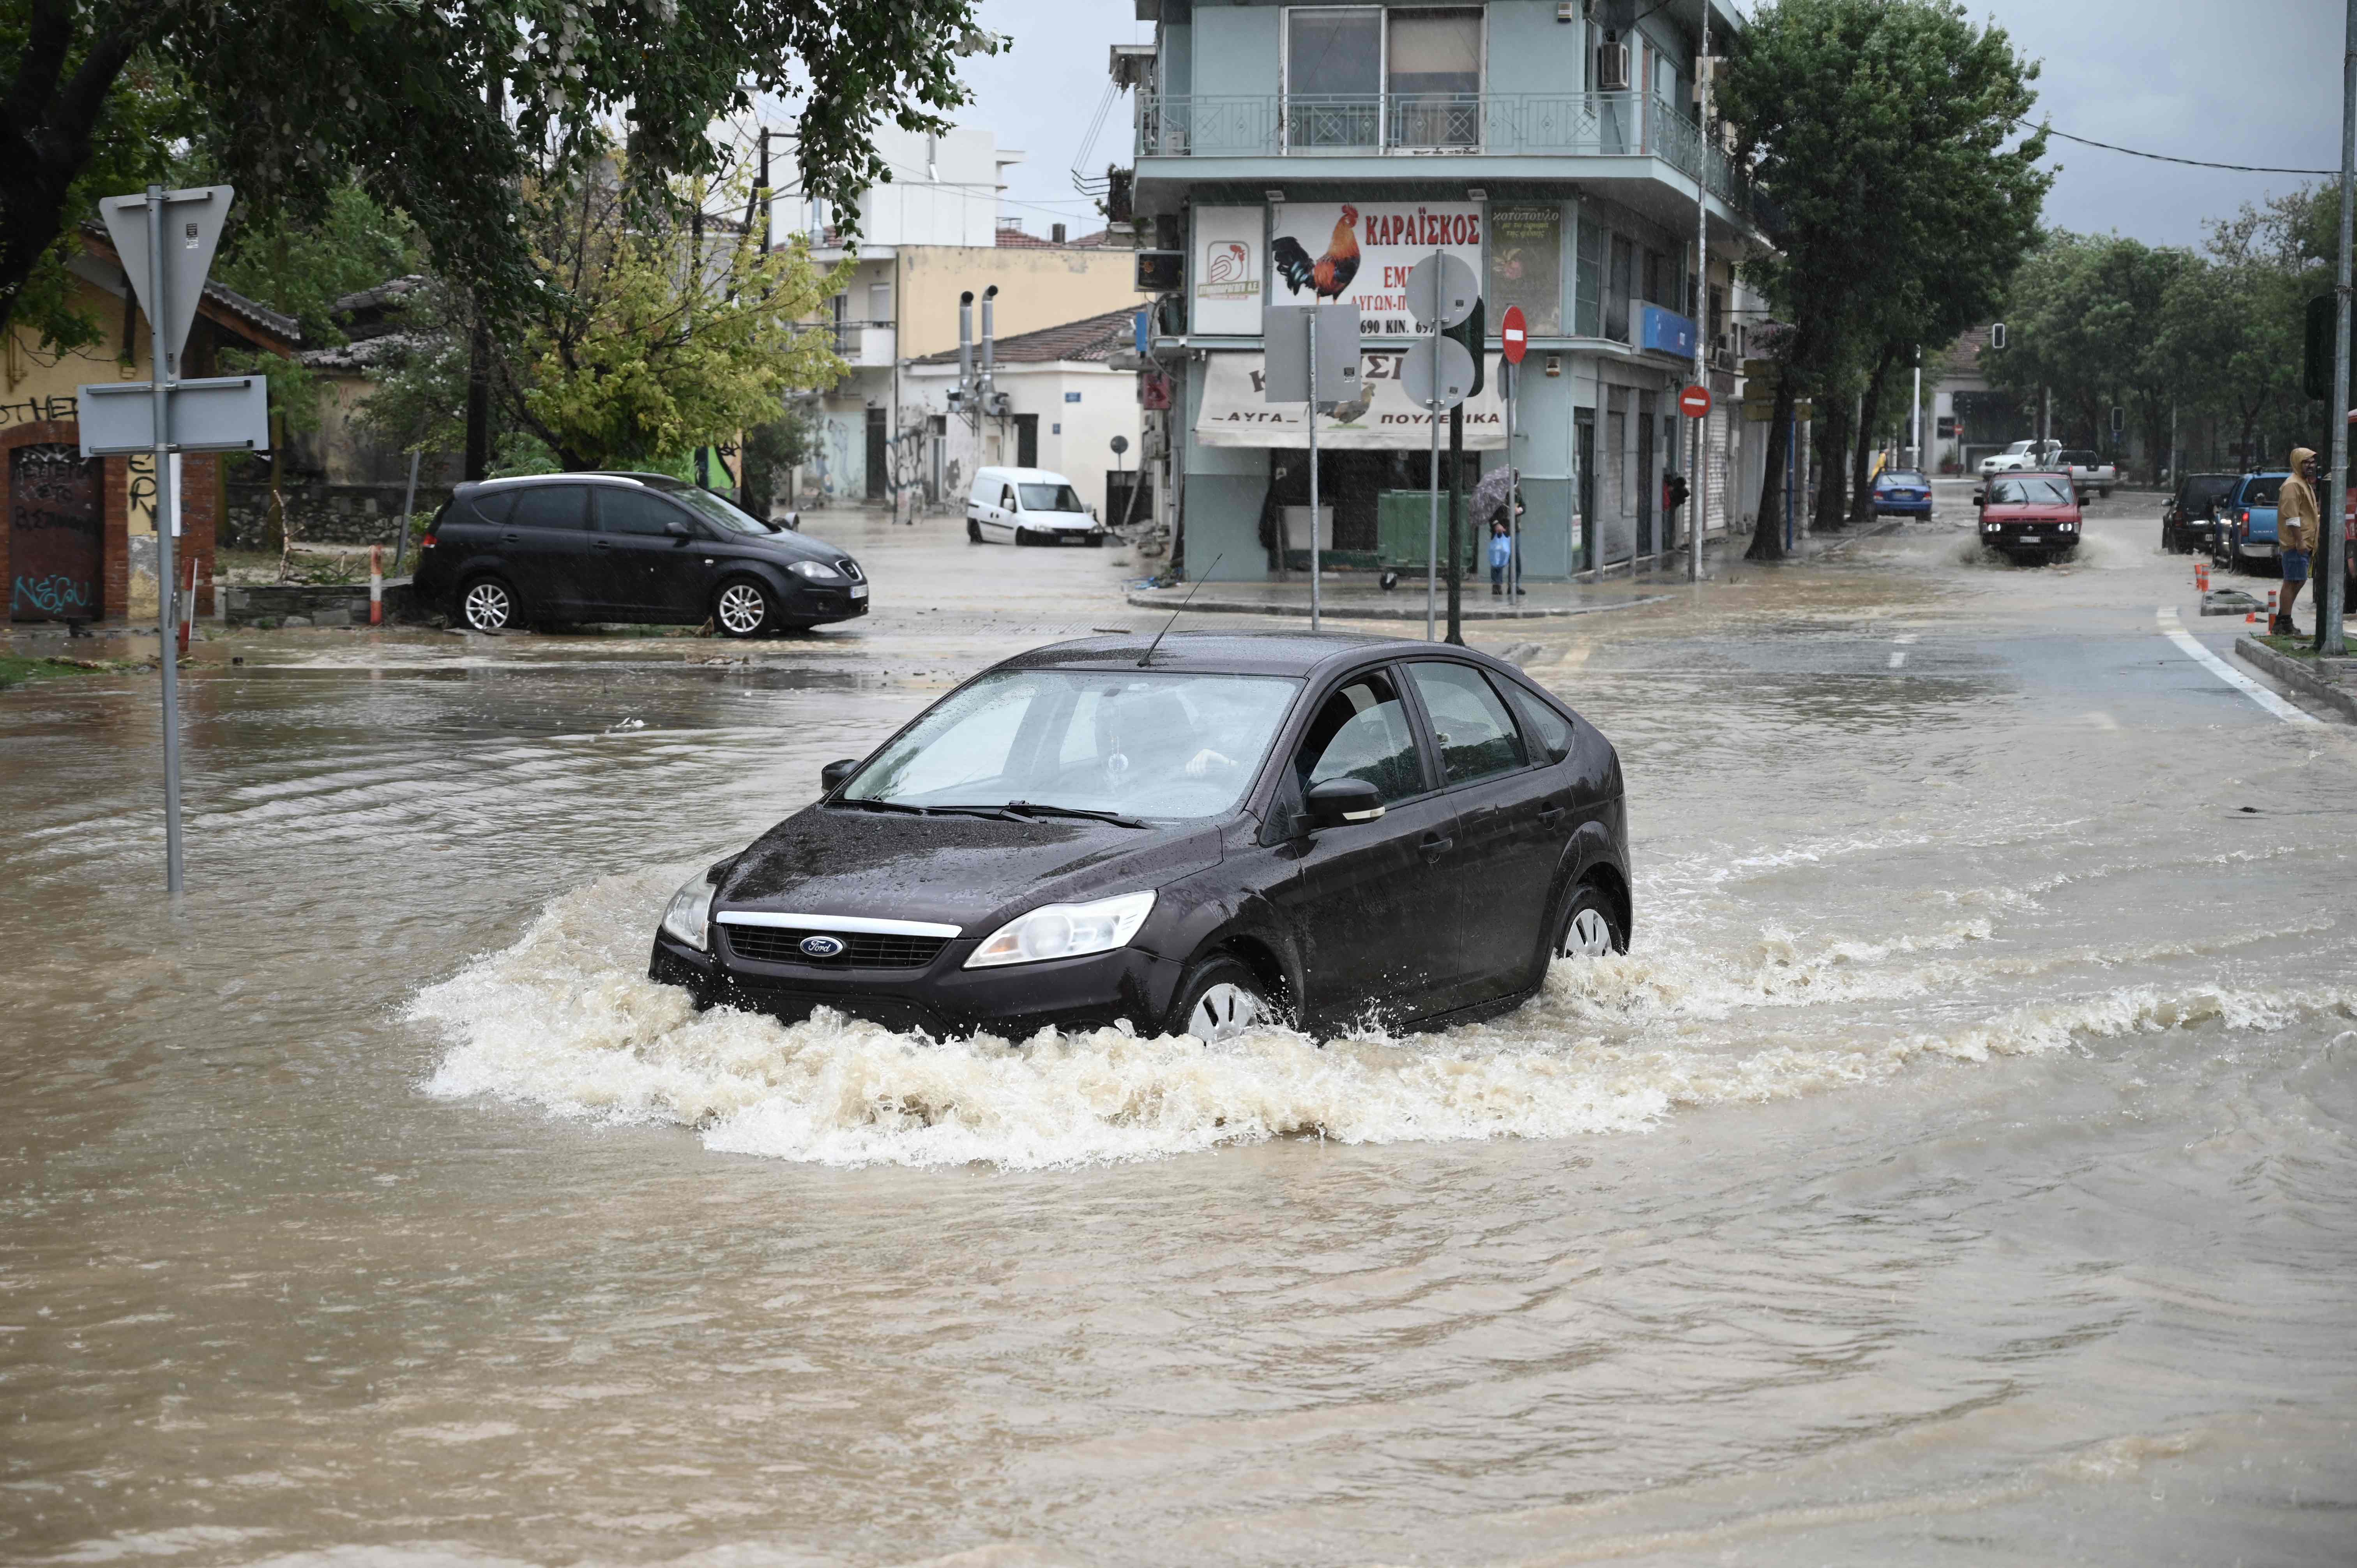 A vehicle crosses a flooded road in the city of Volos, central Greece